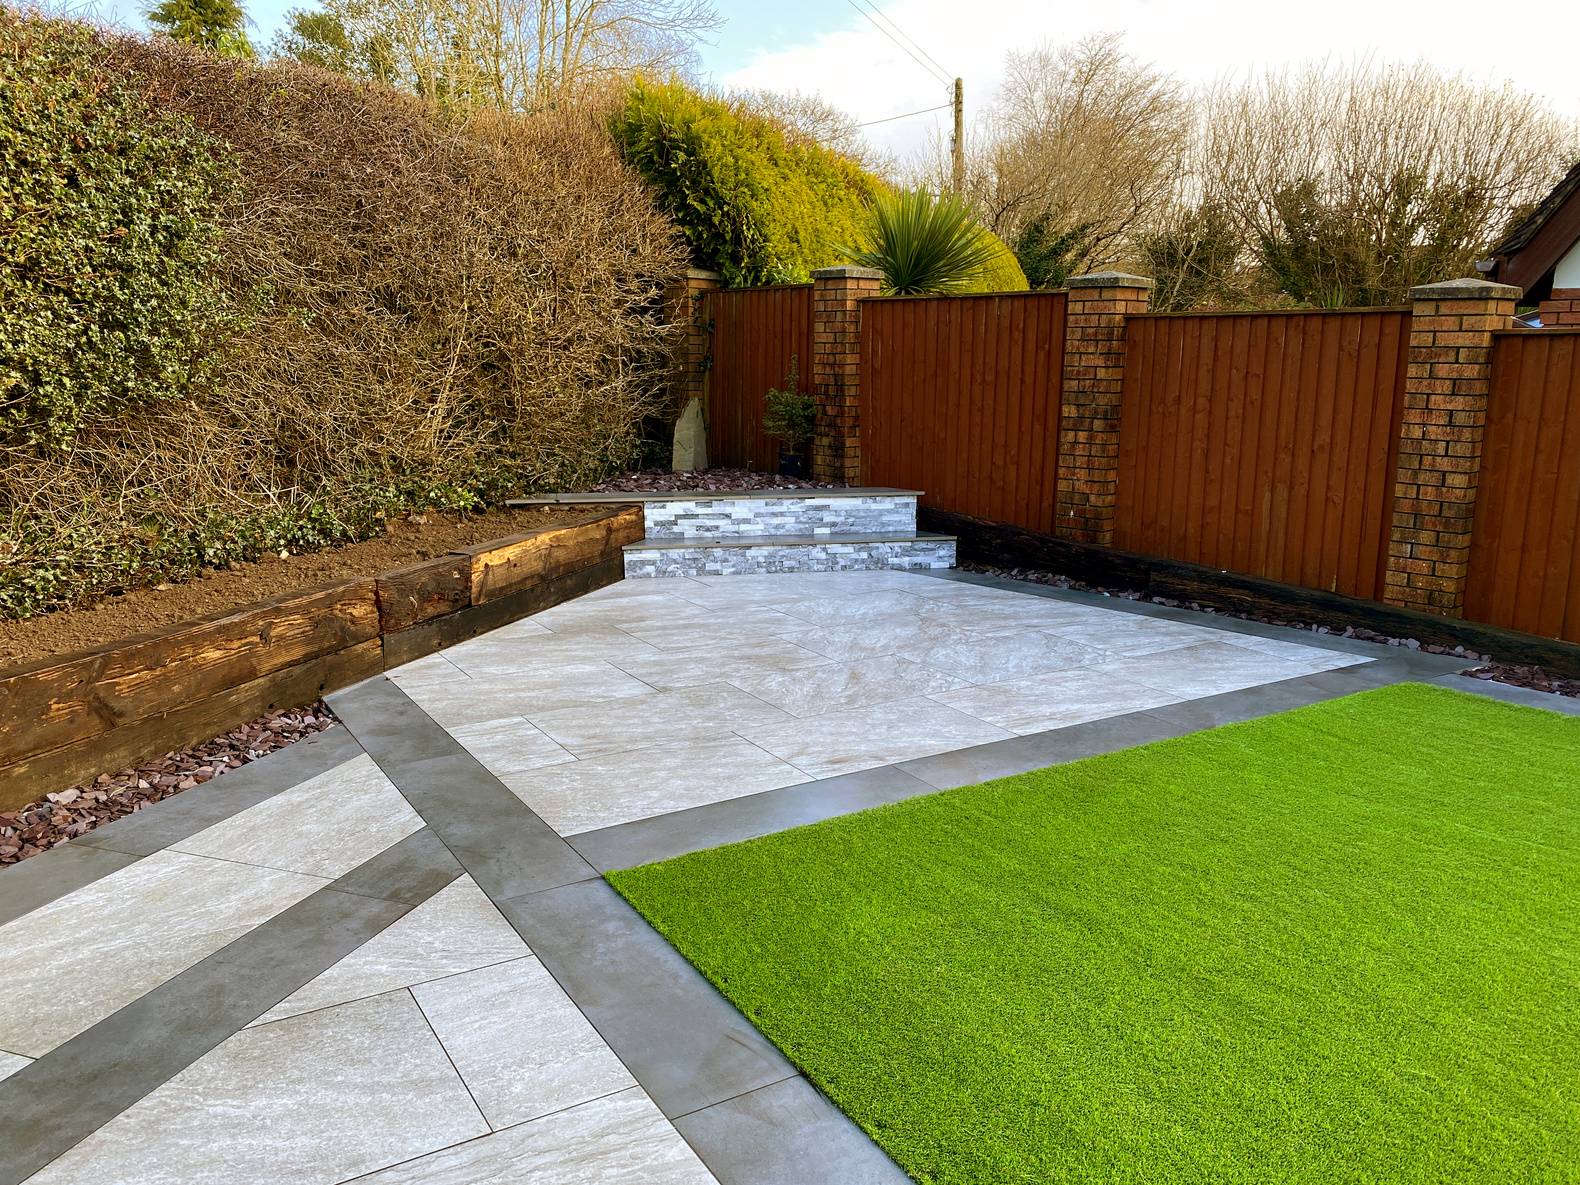 Landscaped garden with artificial lawn